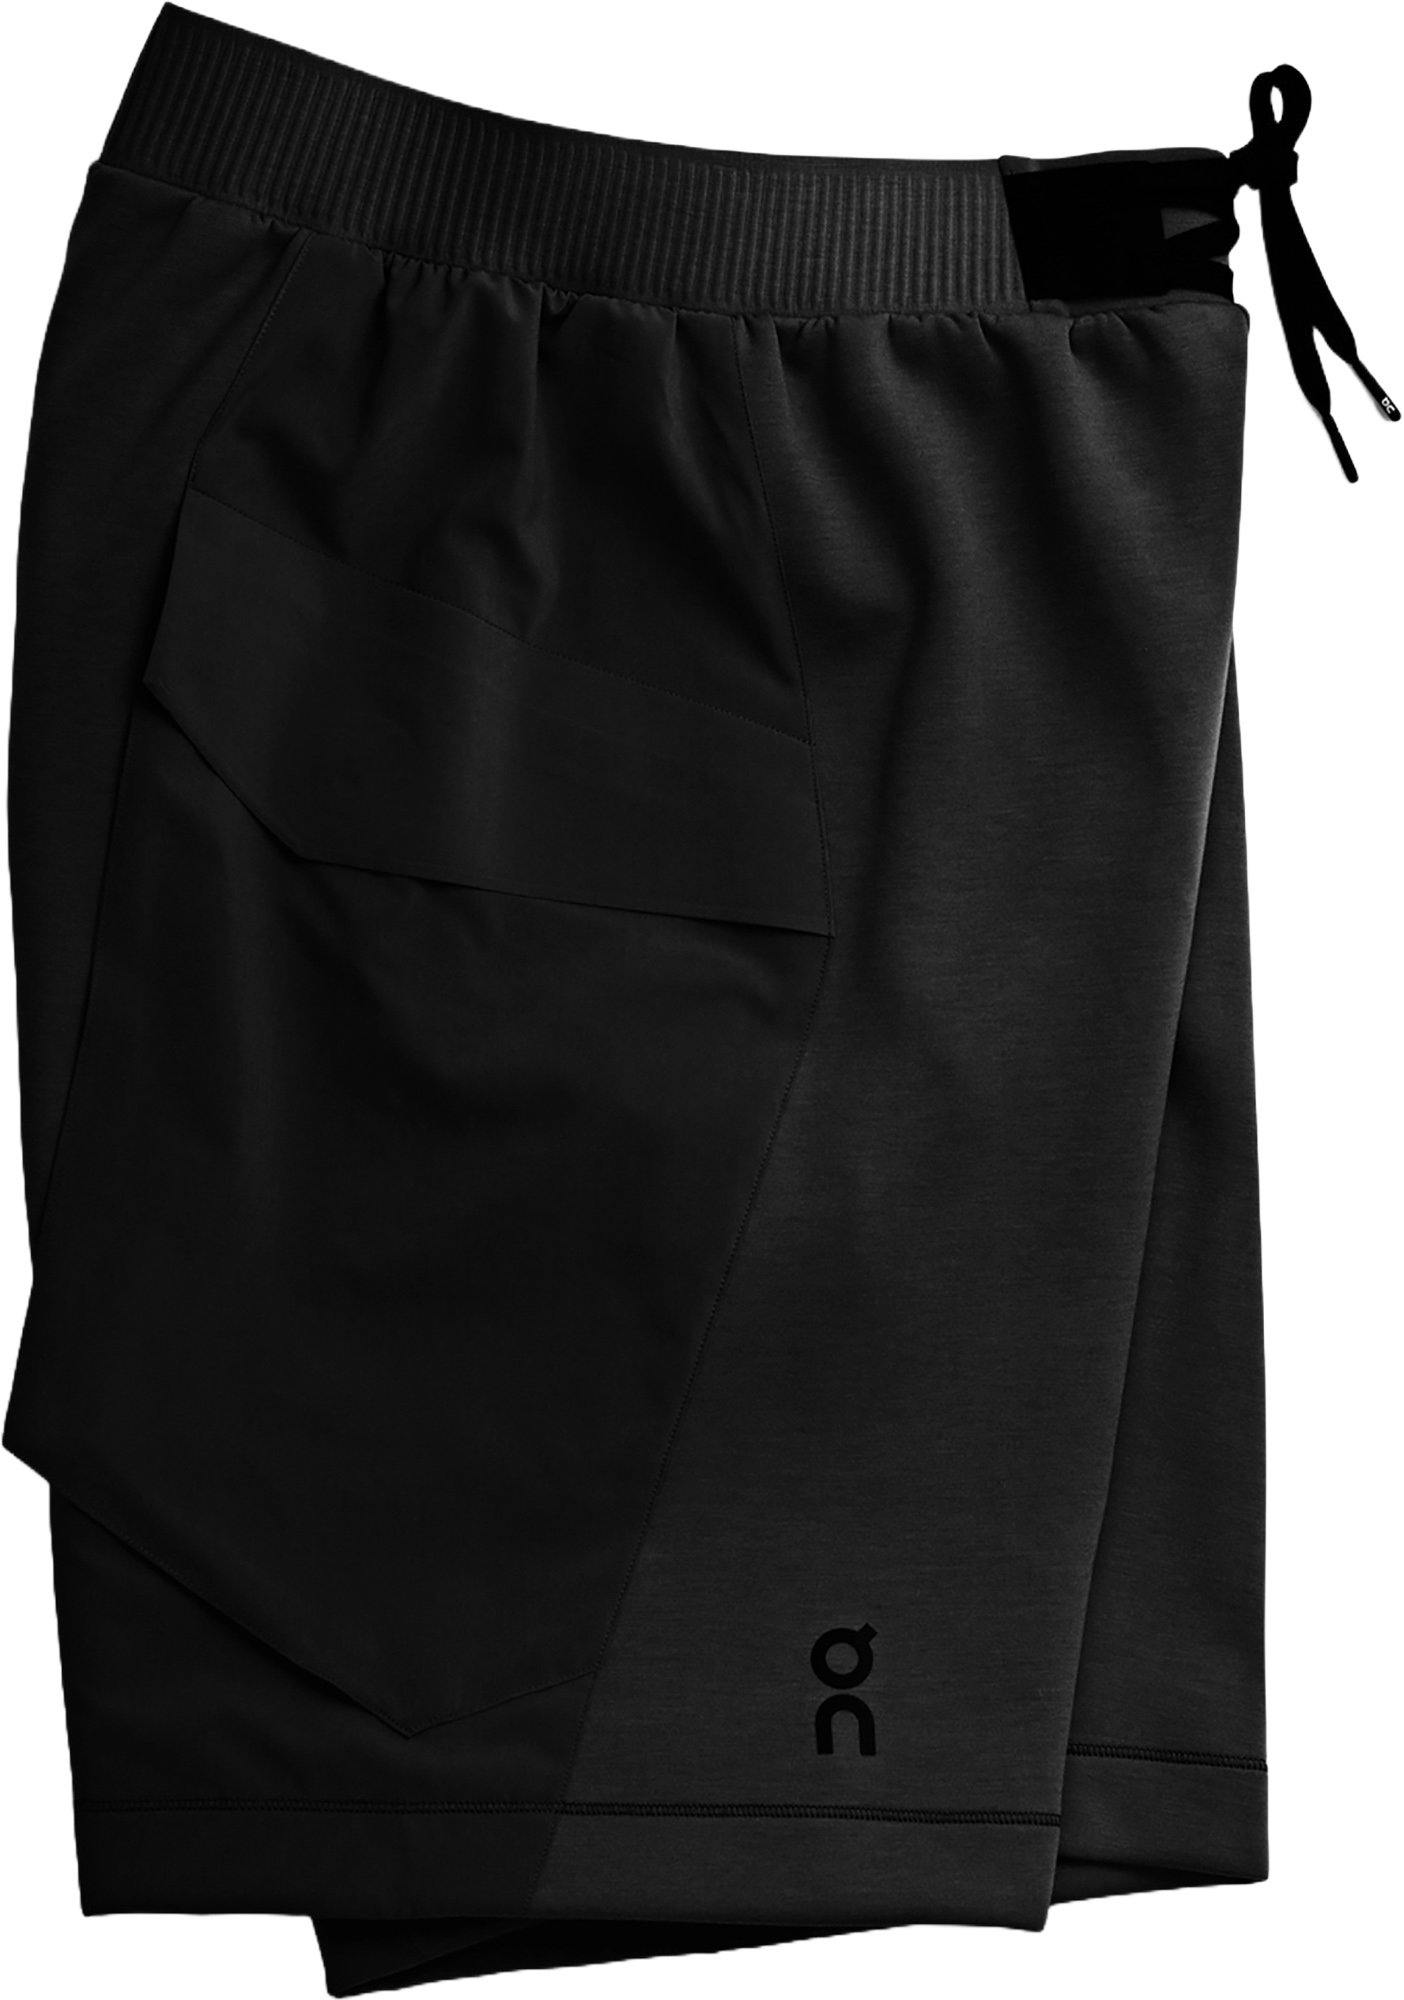 Product image for Movement Short - Men's